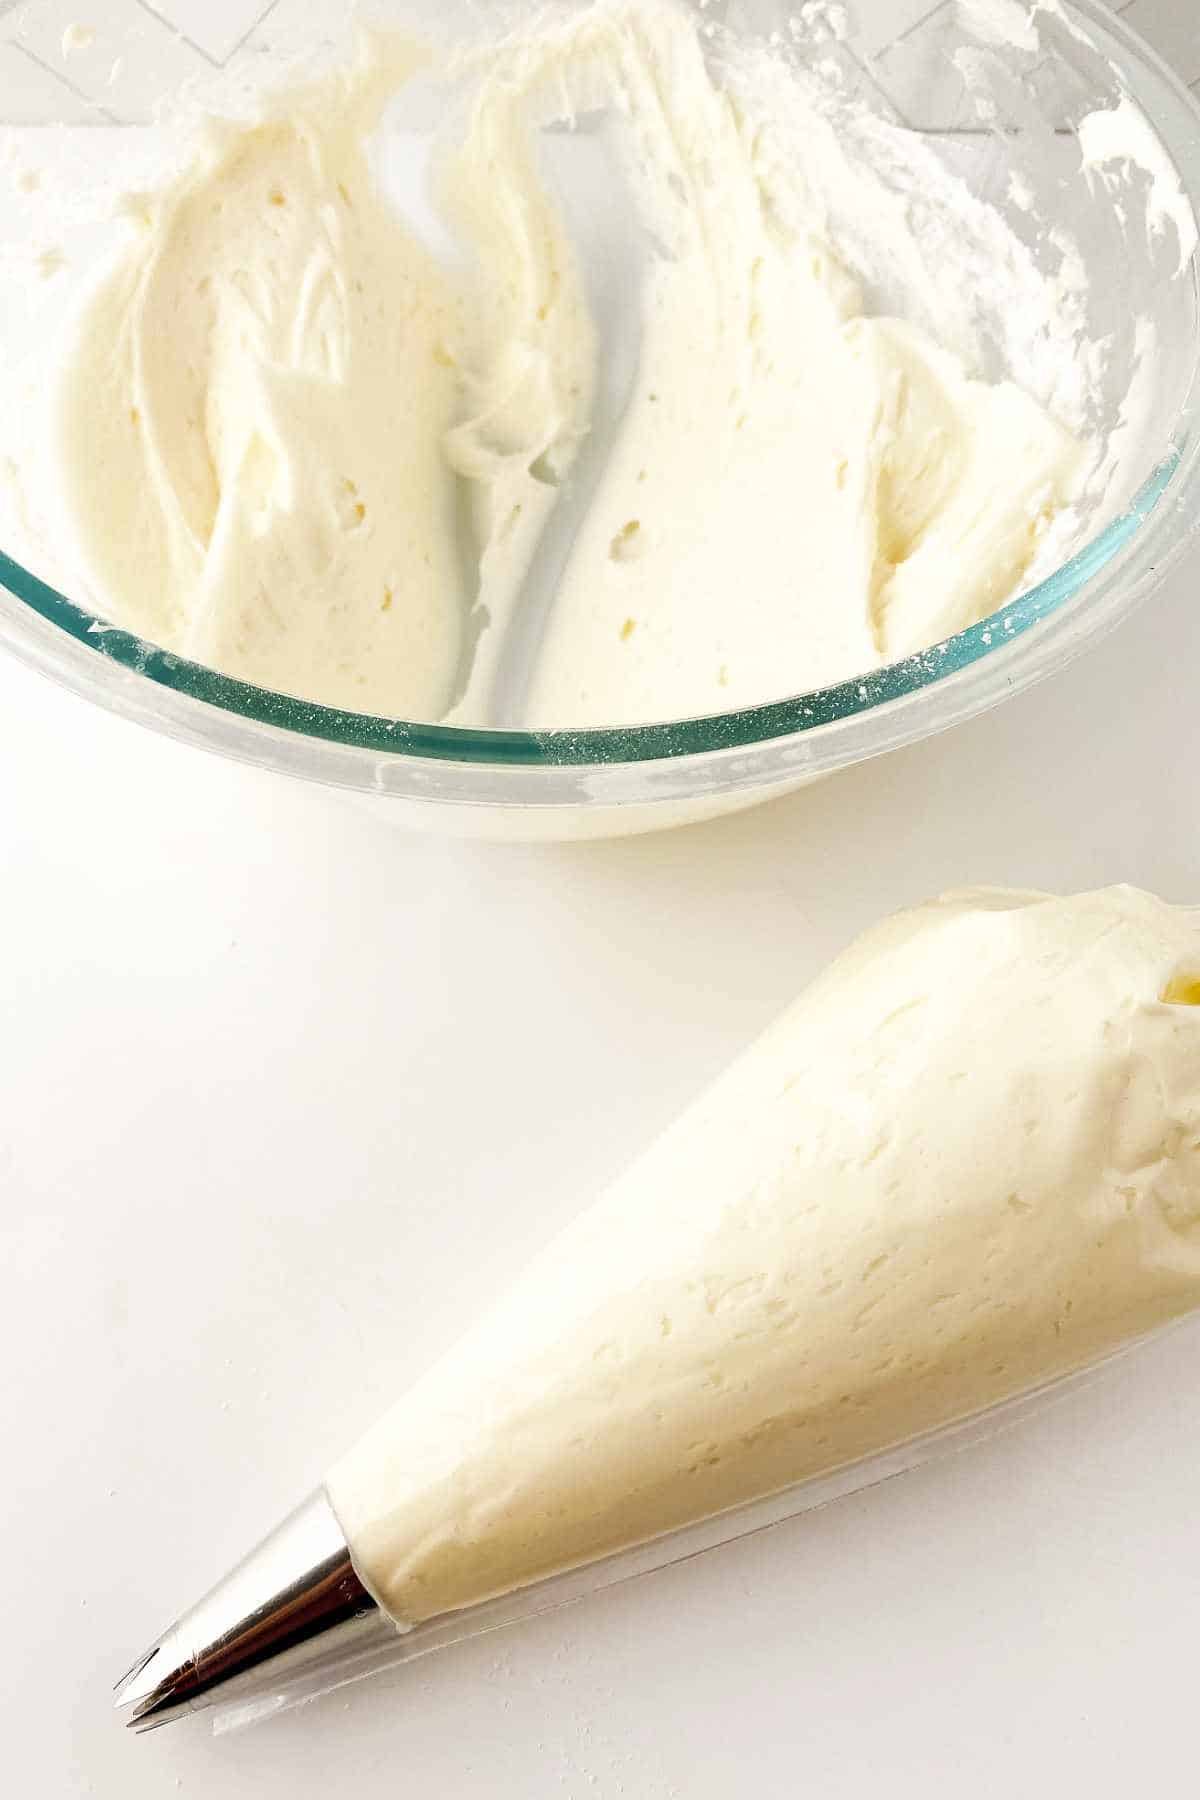 Bowl and piping bag of creamy white icing.